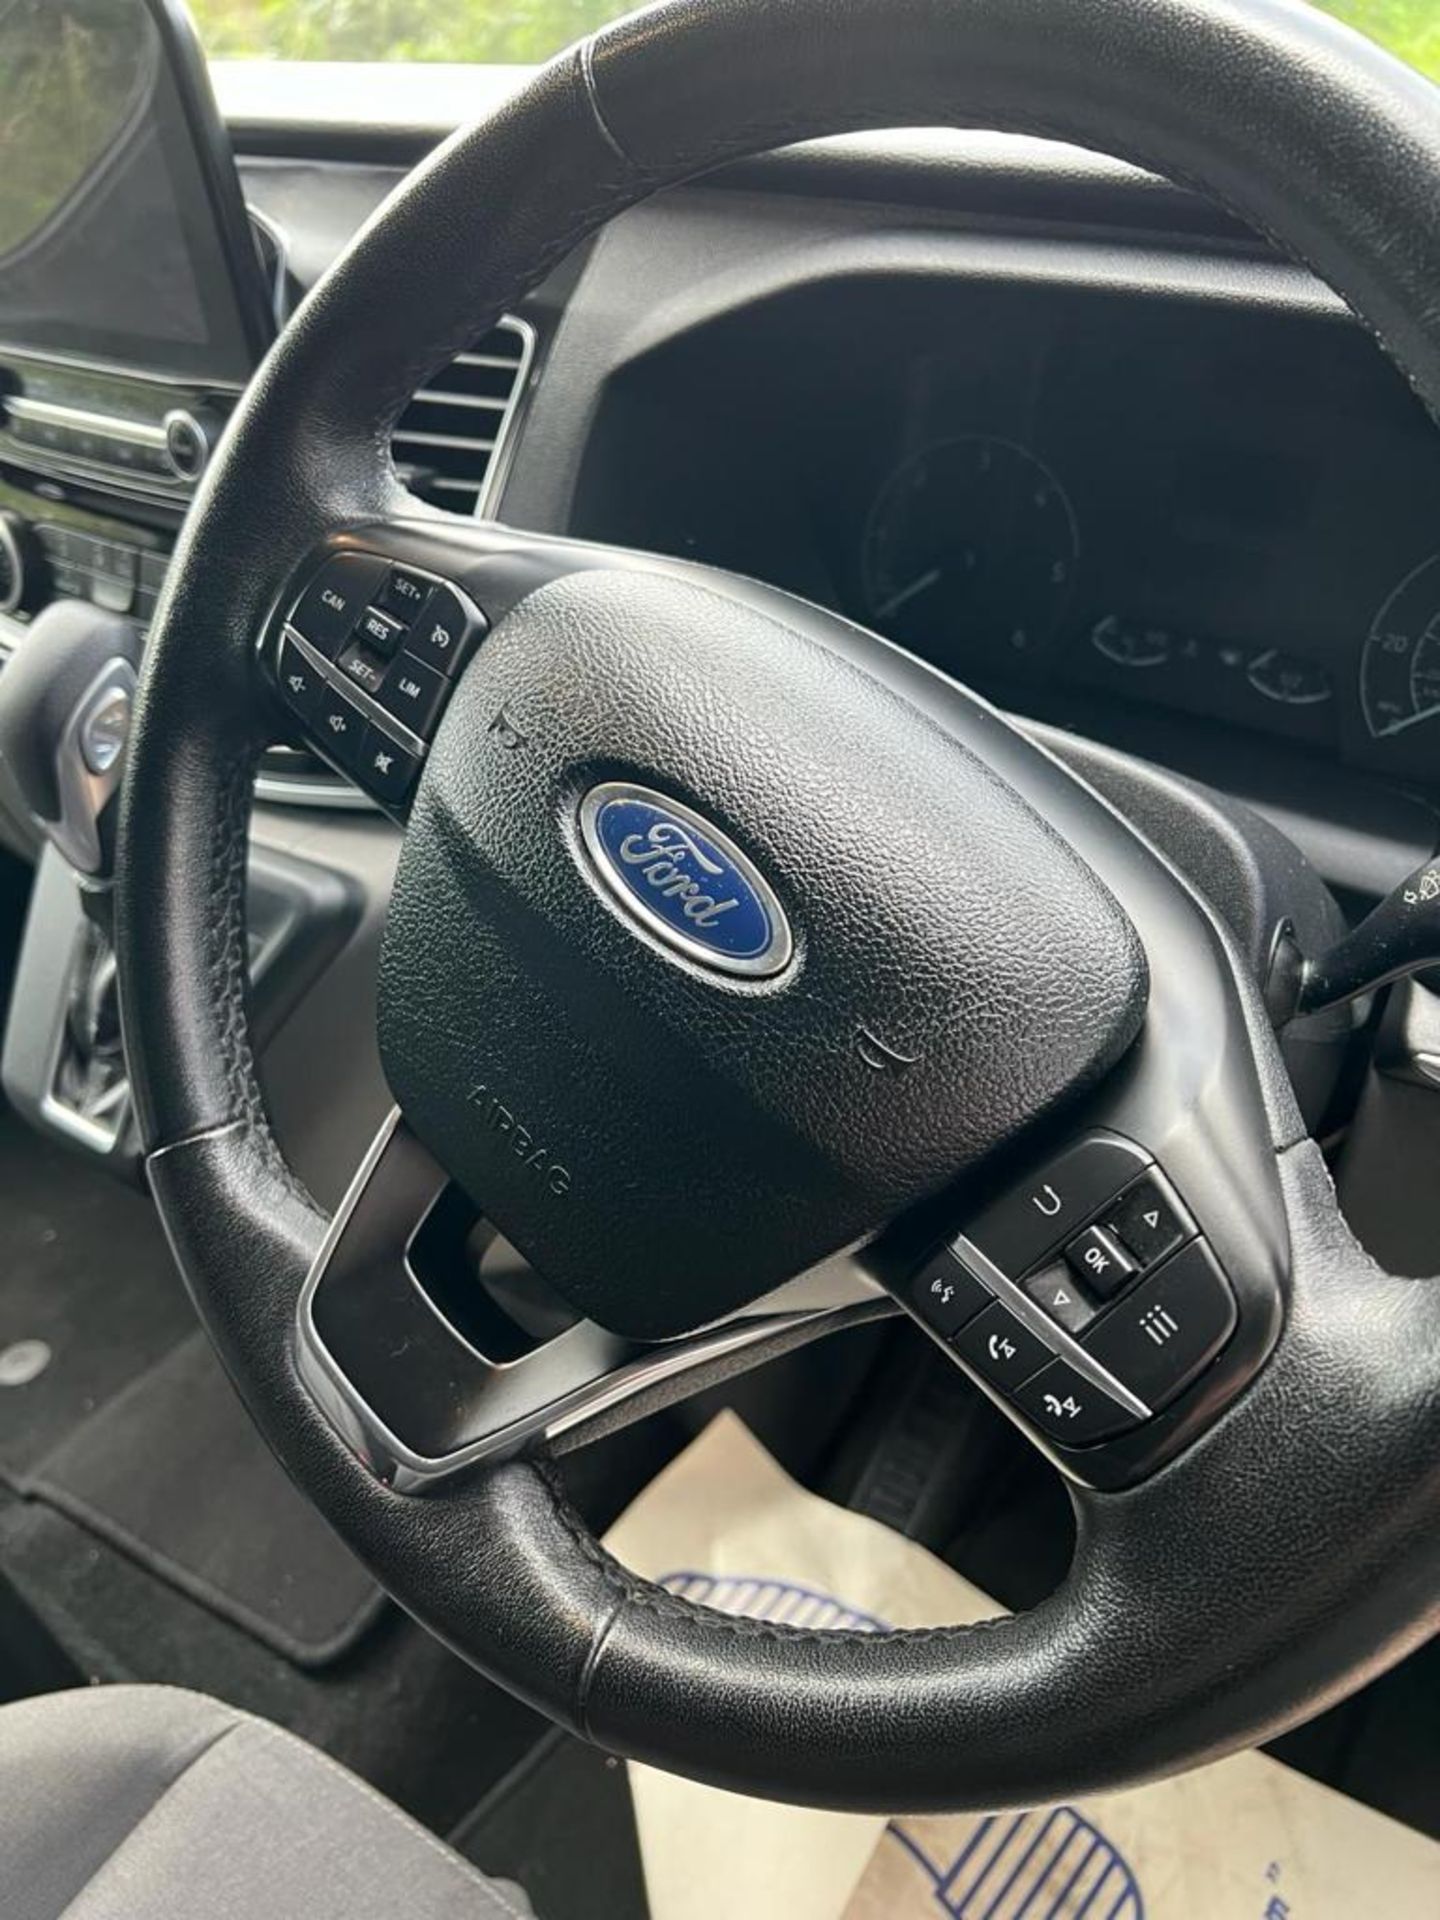 2019 FORD INDEPENDENCE RS AUTO BLACK WAV TOURNEO *NO VAT* - Image 23 of 50